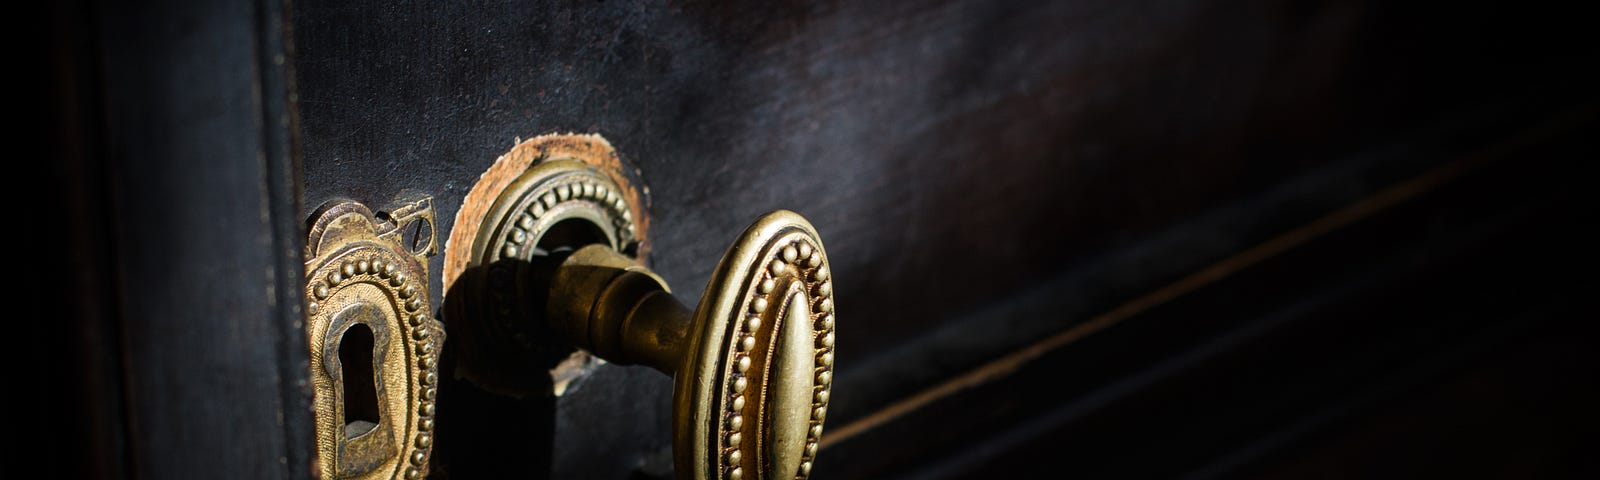 A secret handle rests silently in a black and mysterious door.